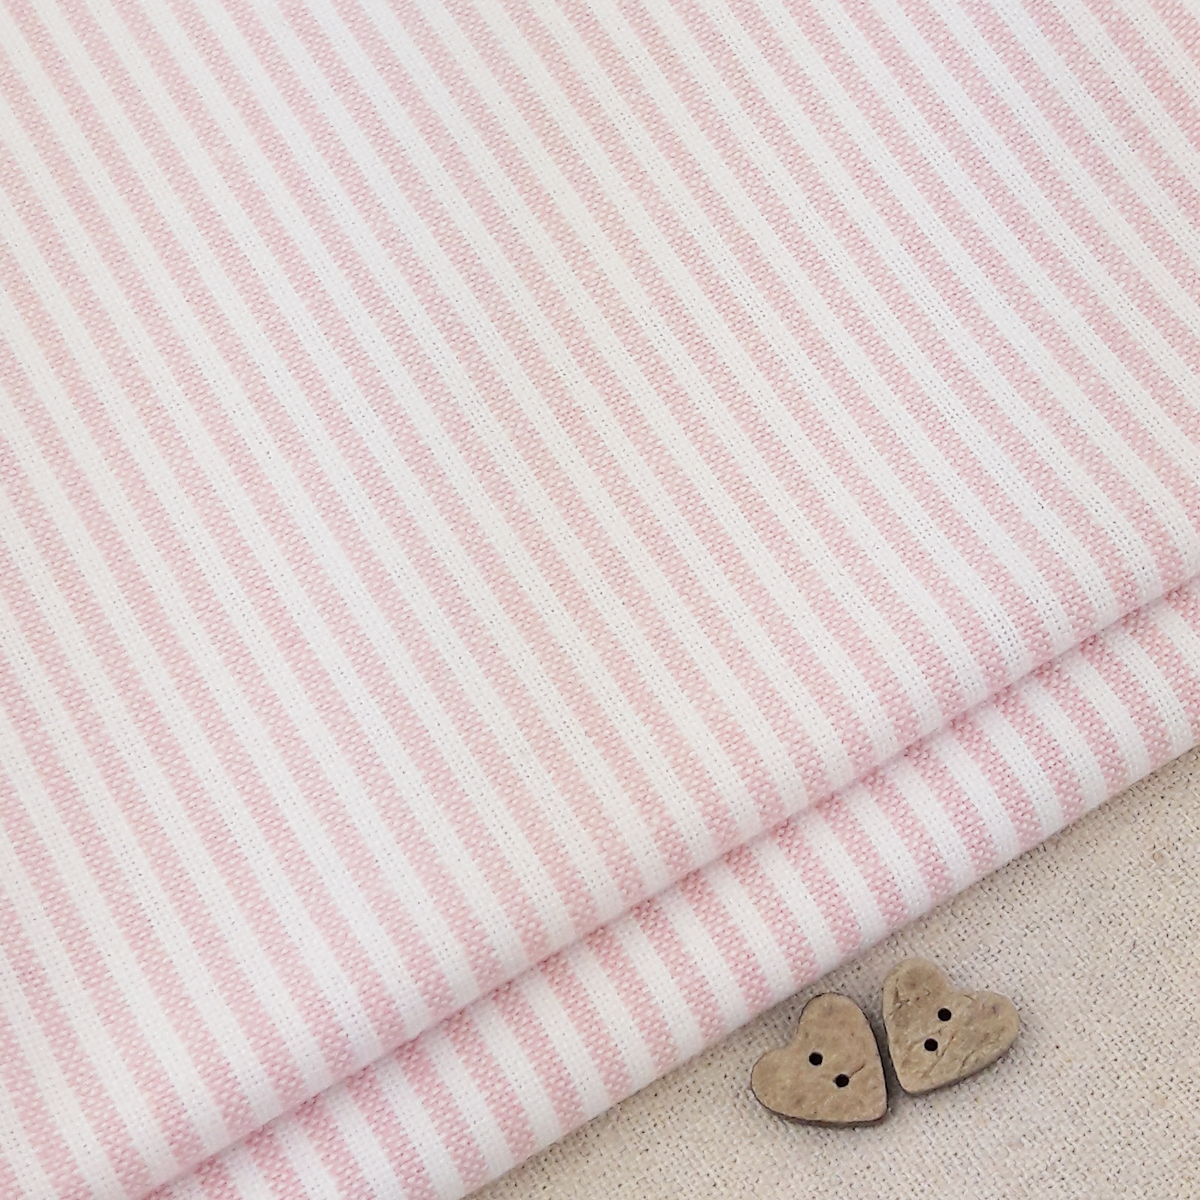 Pink And Hot Pink Stripe Fabric